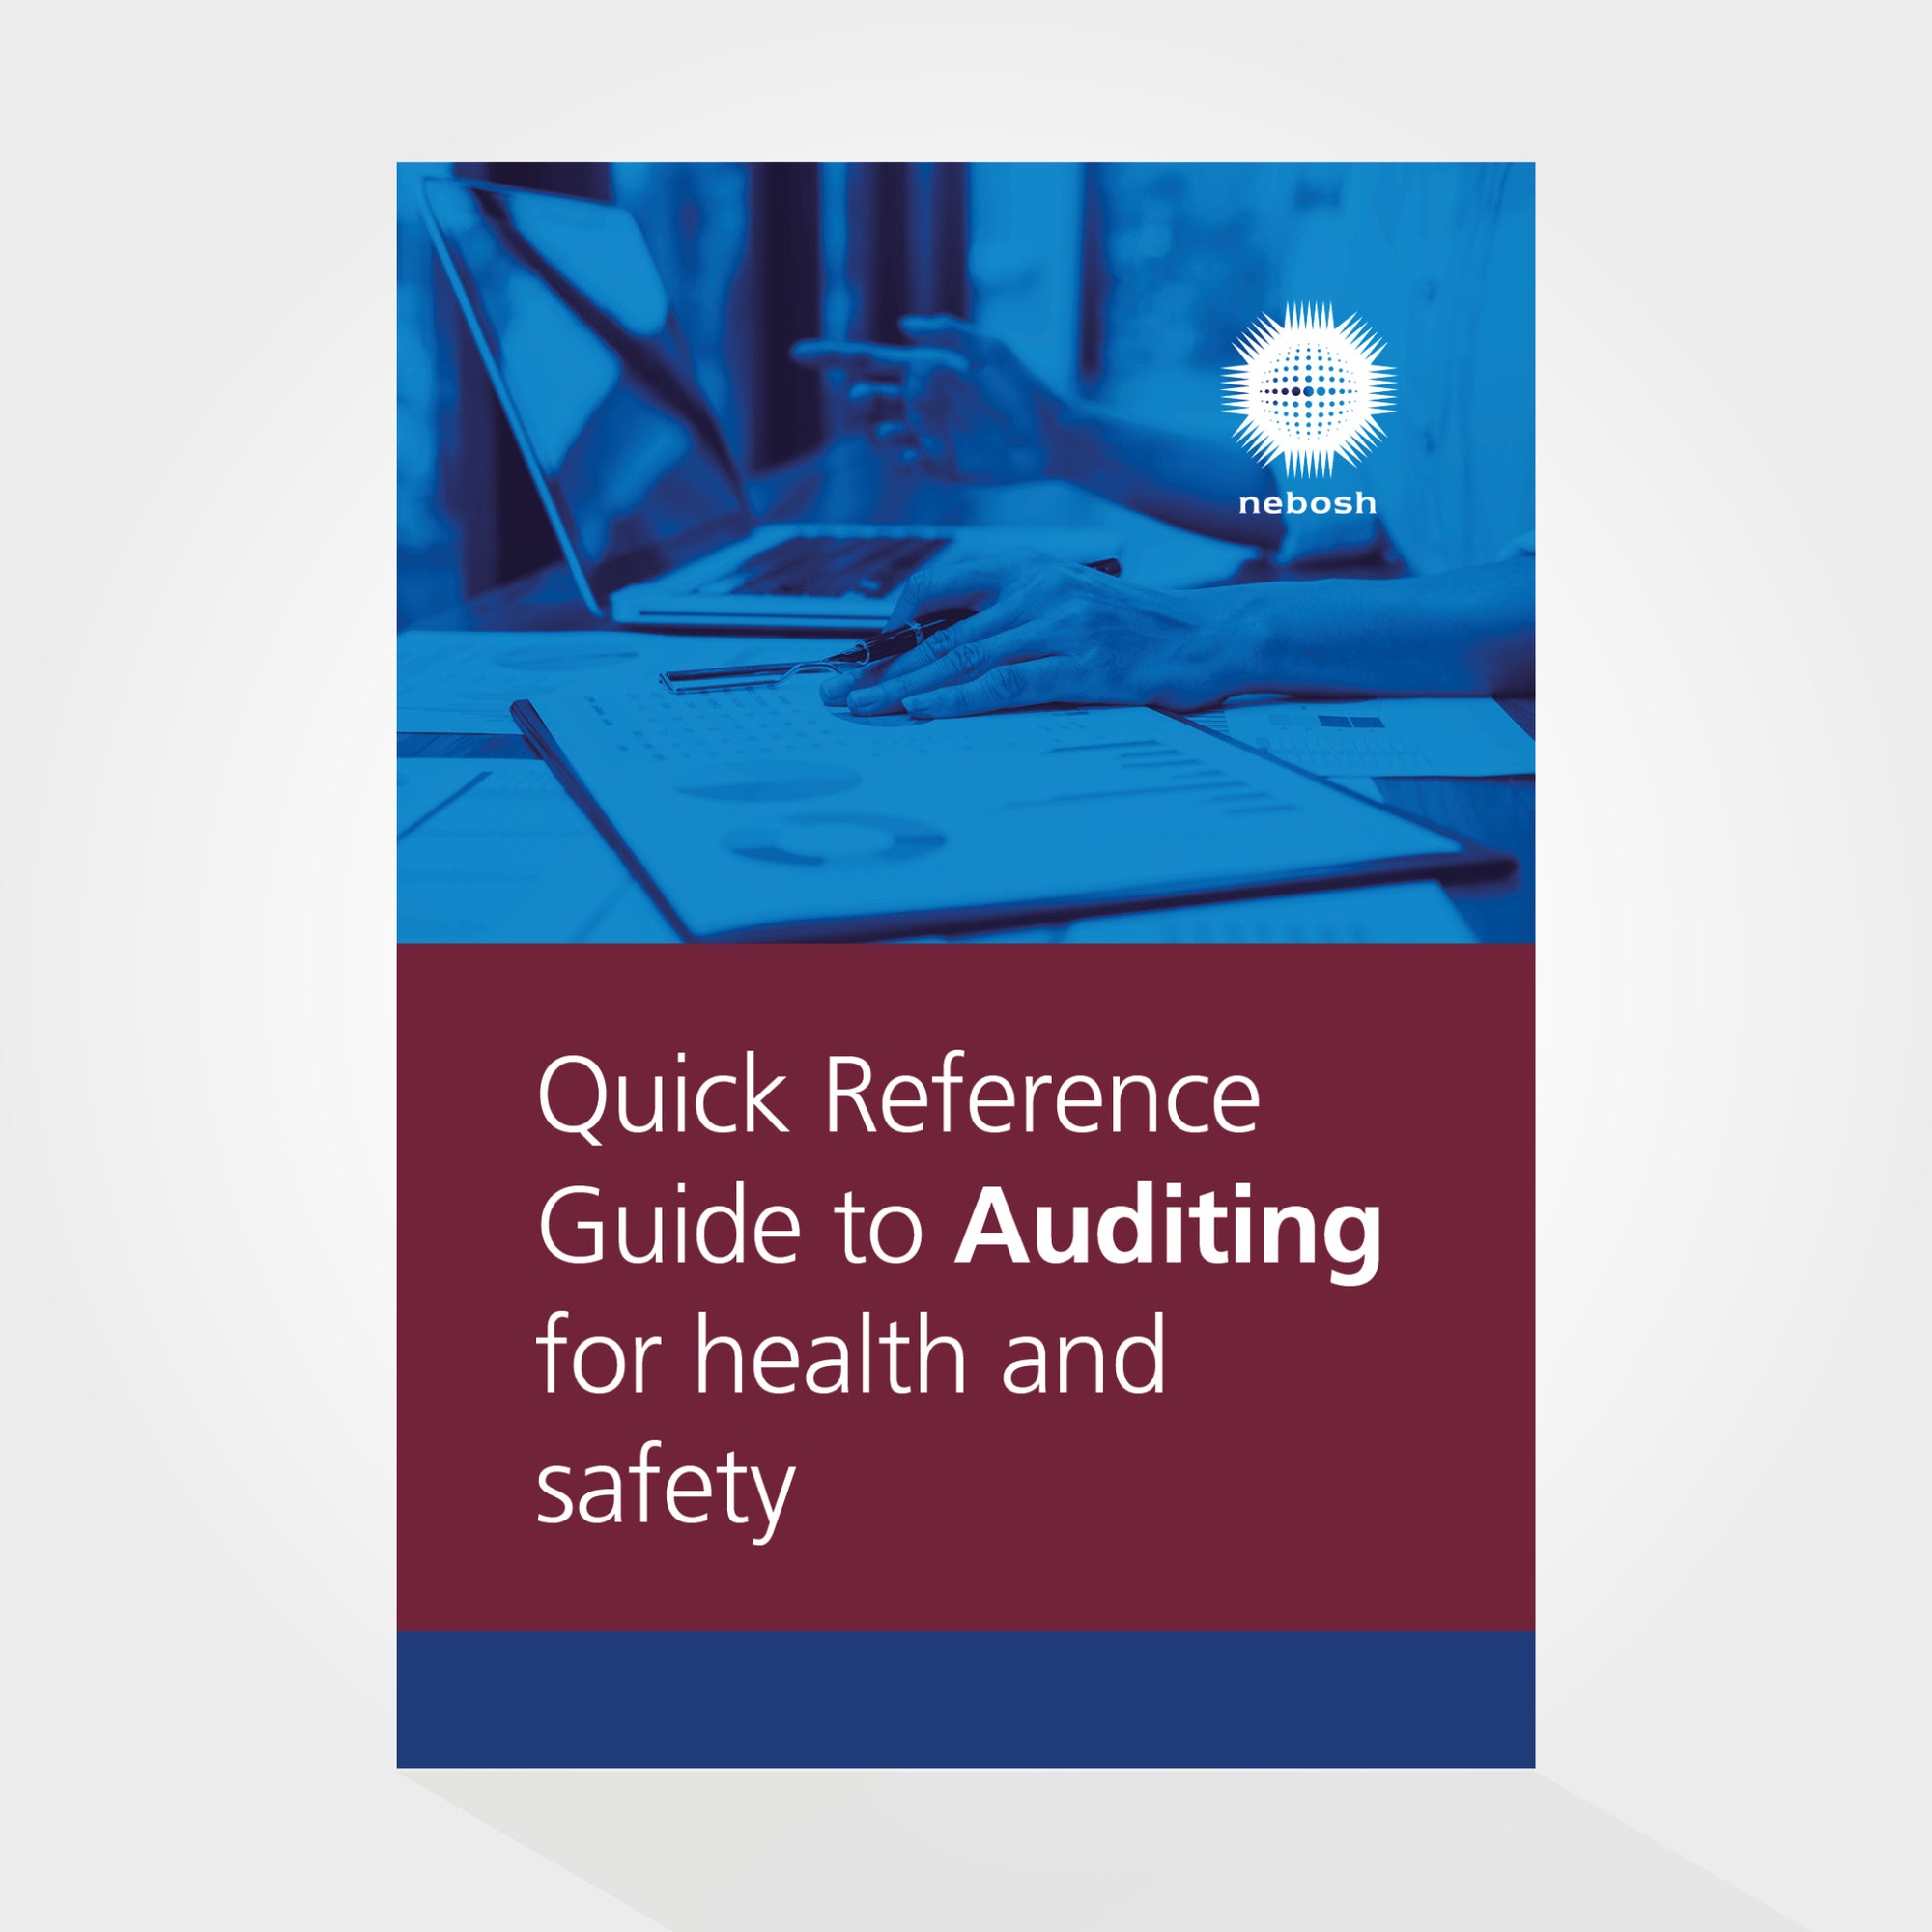 Quick Reference Guide to Auditing for Health and Safety